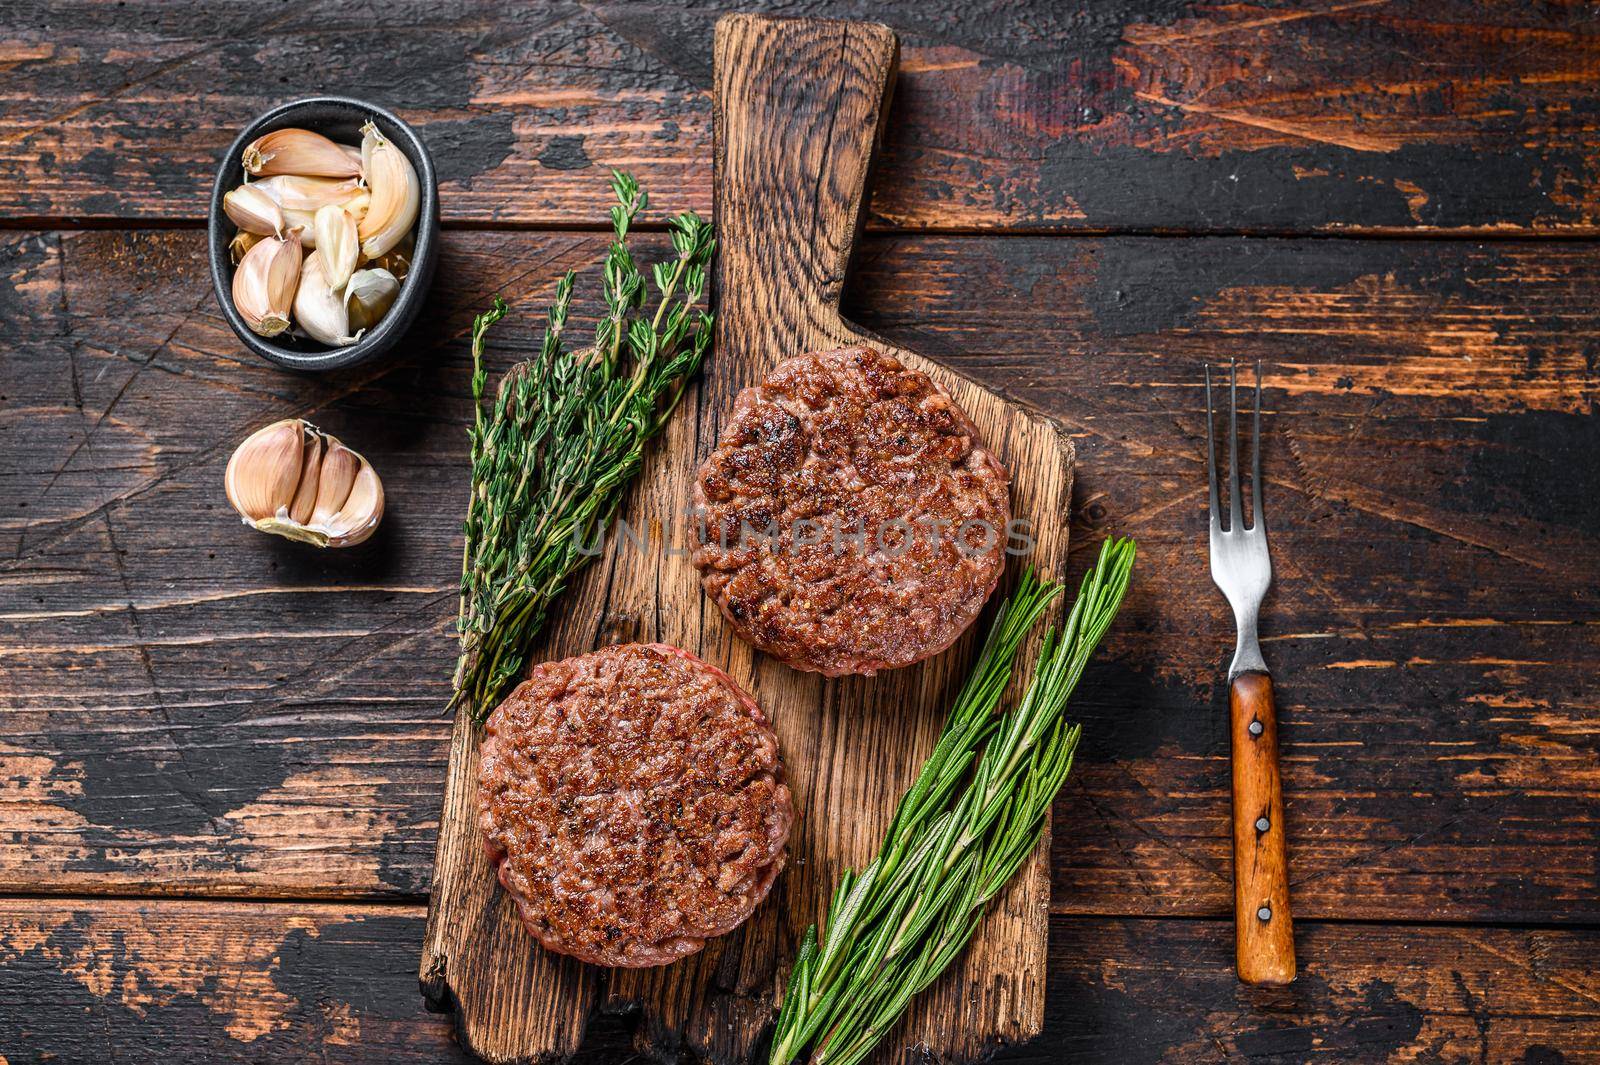 Barbecue steak patties for burger from ground beef meat on a wooden cutting board. Dark wooden background. Top view.